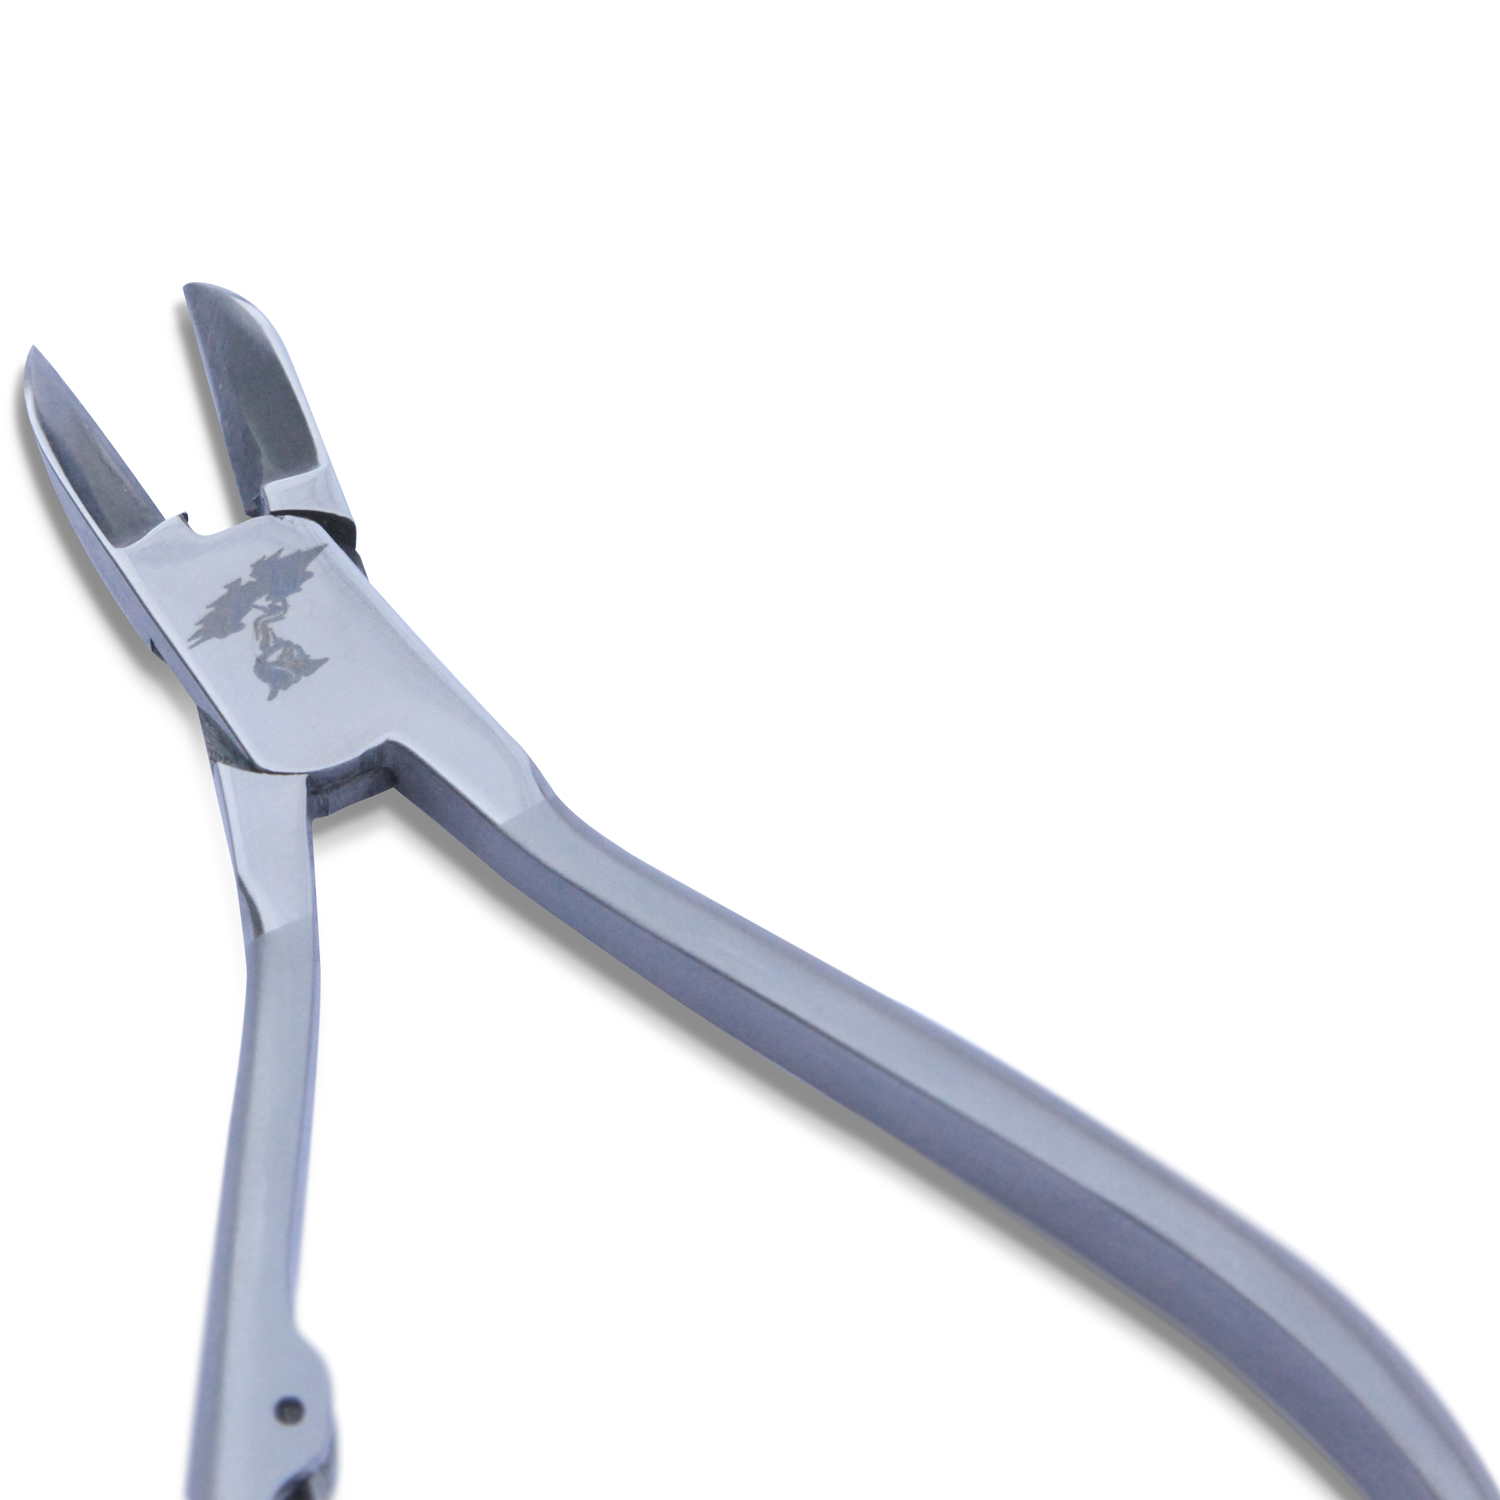 Toe Nail Clippers | Heavy Duty-Stainless Steel Toenail Clippers only ...